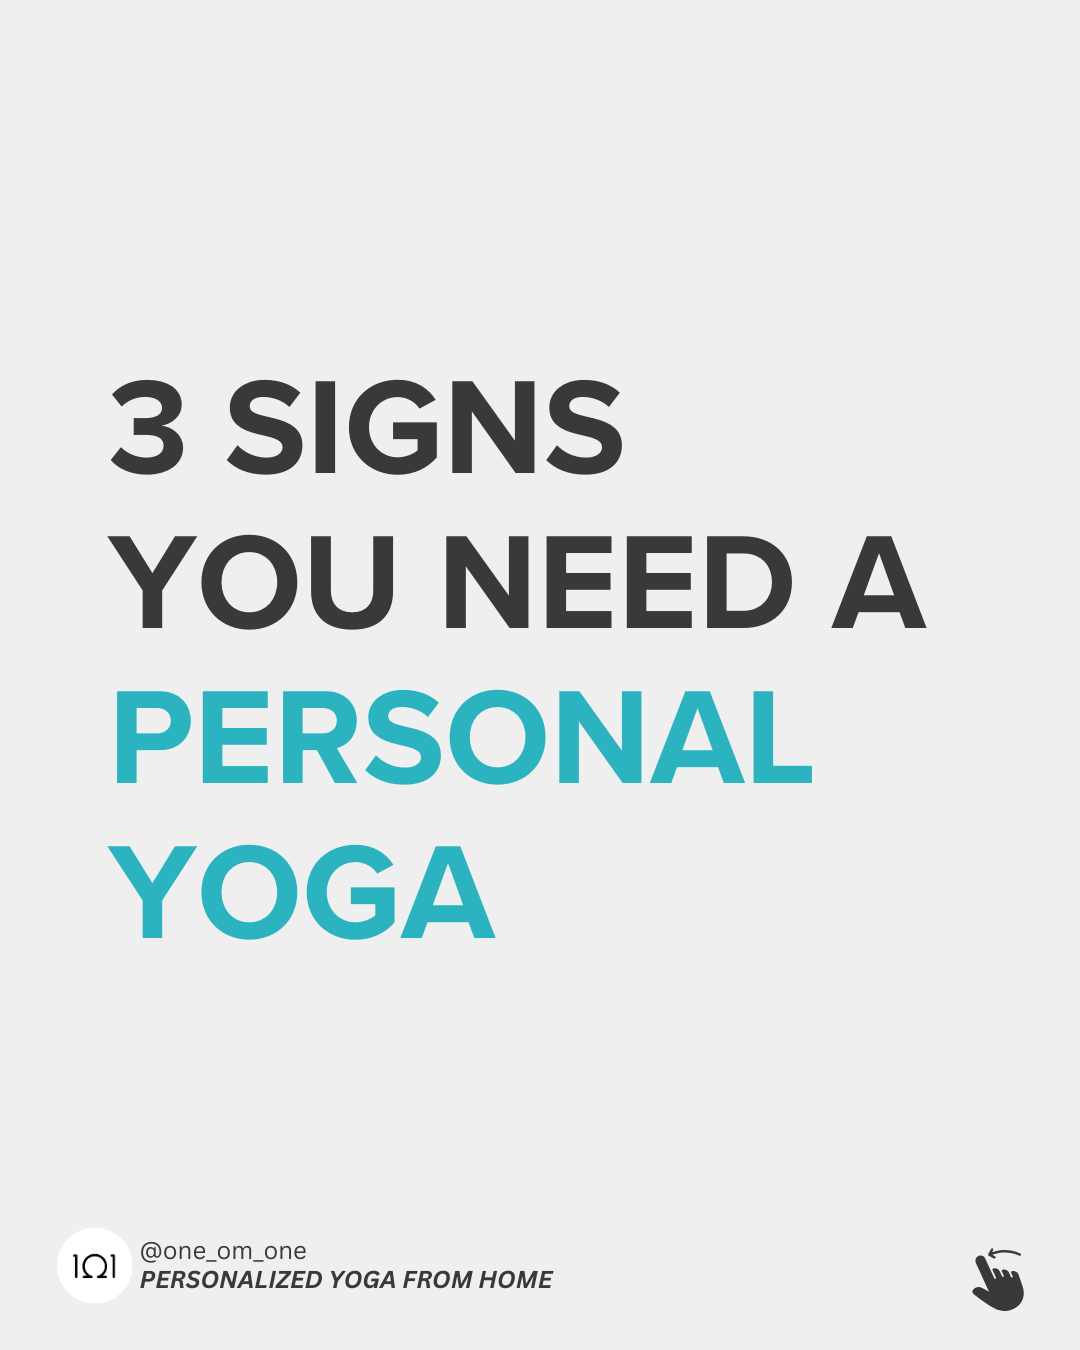 3 signs you need a personal yoga instead of group classes